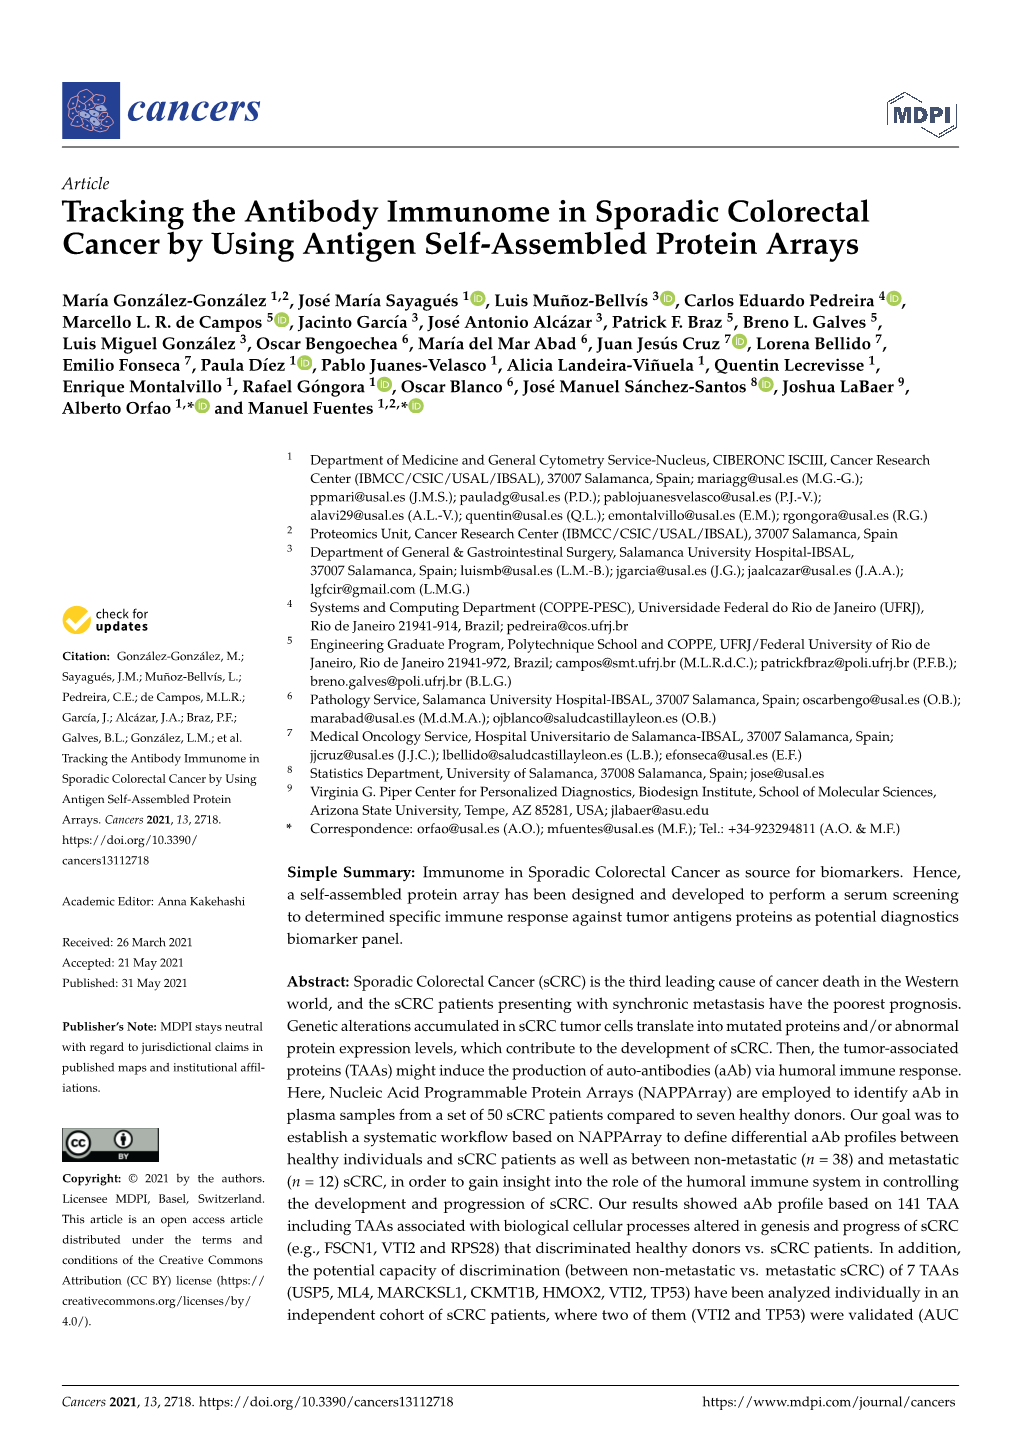 Tracking the Antibody Immunome in Sporadic Colorectal Cancer by Using Antigen Self-Assembled Protein Arrays